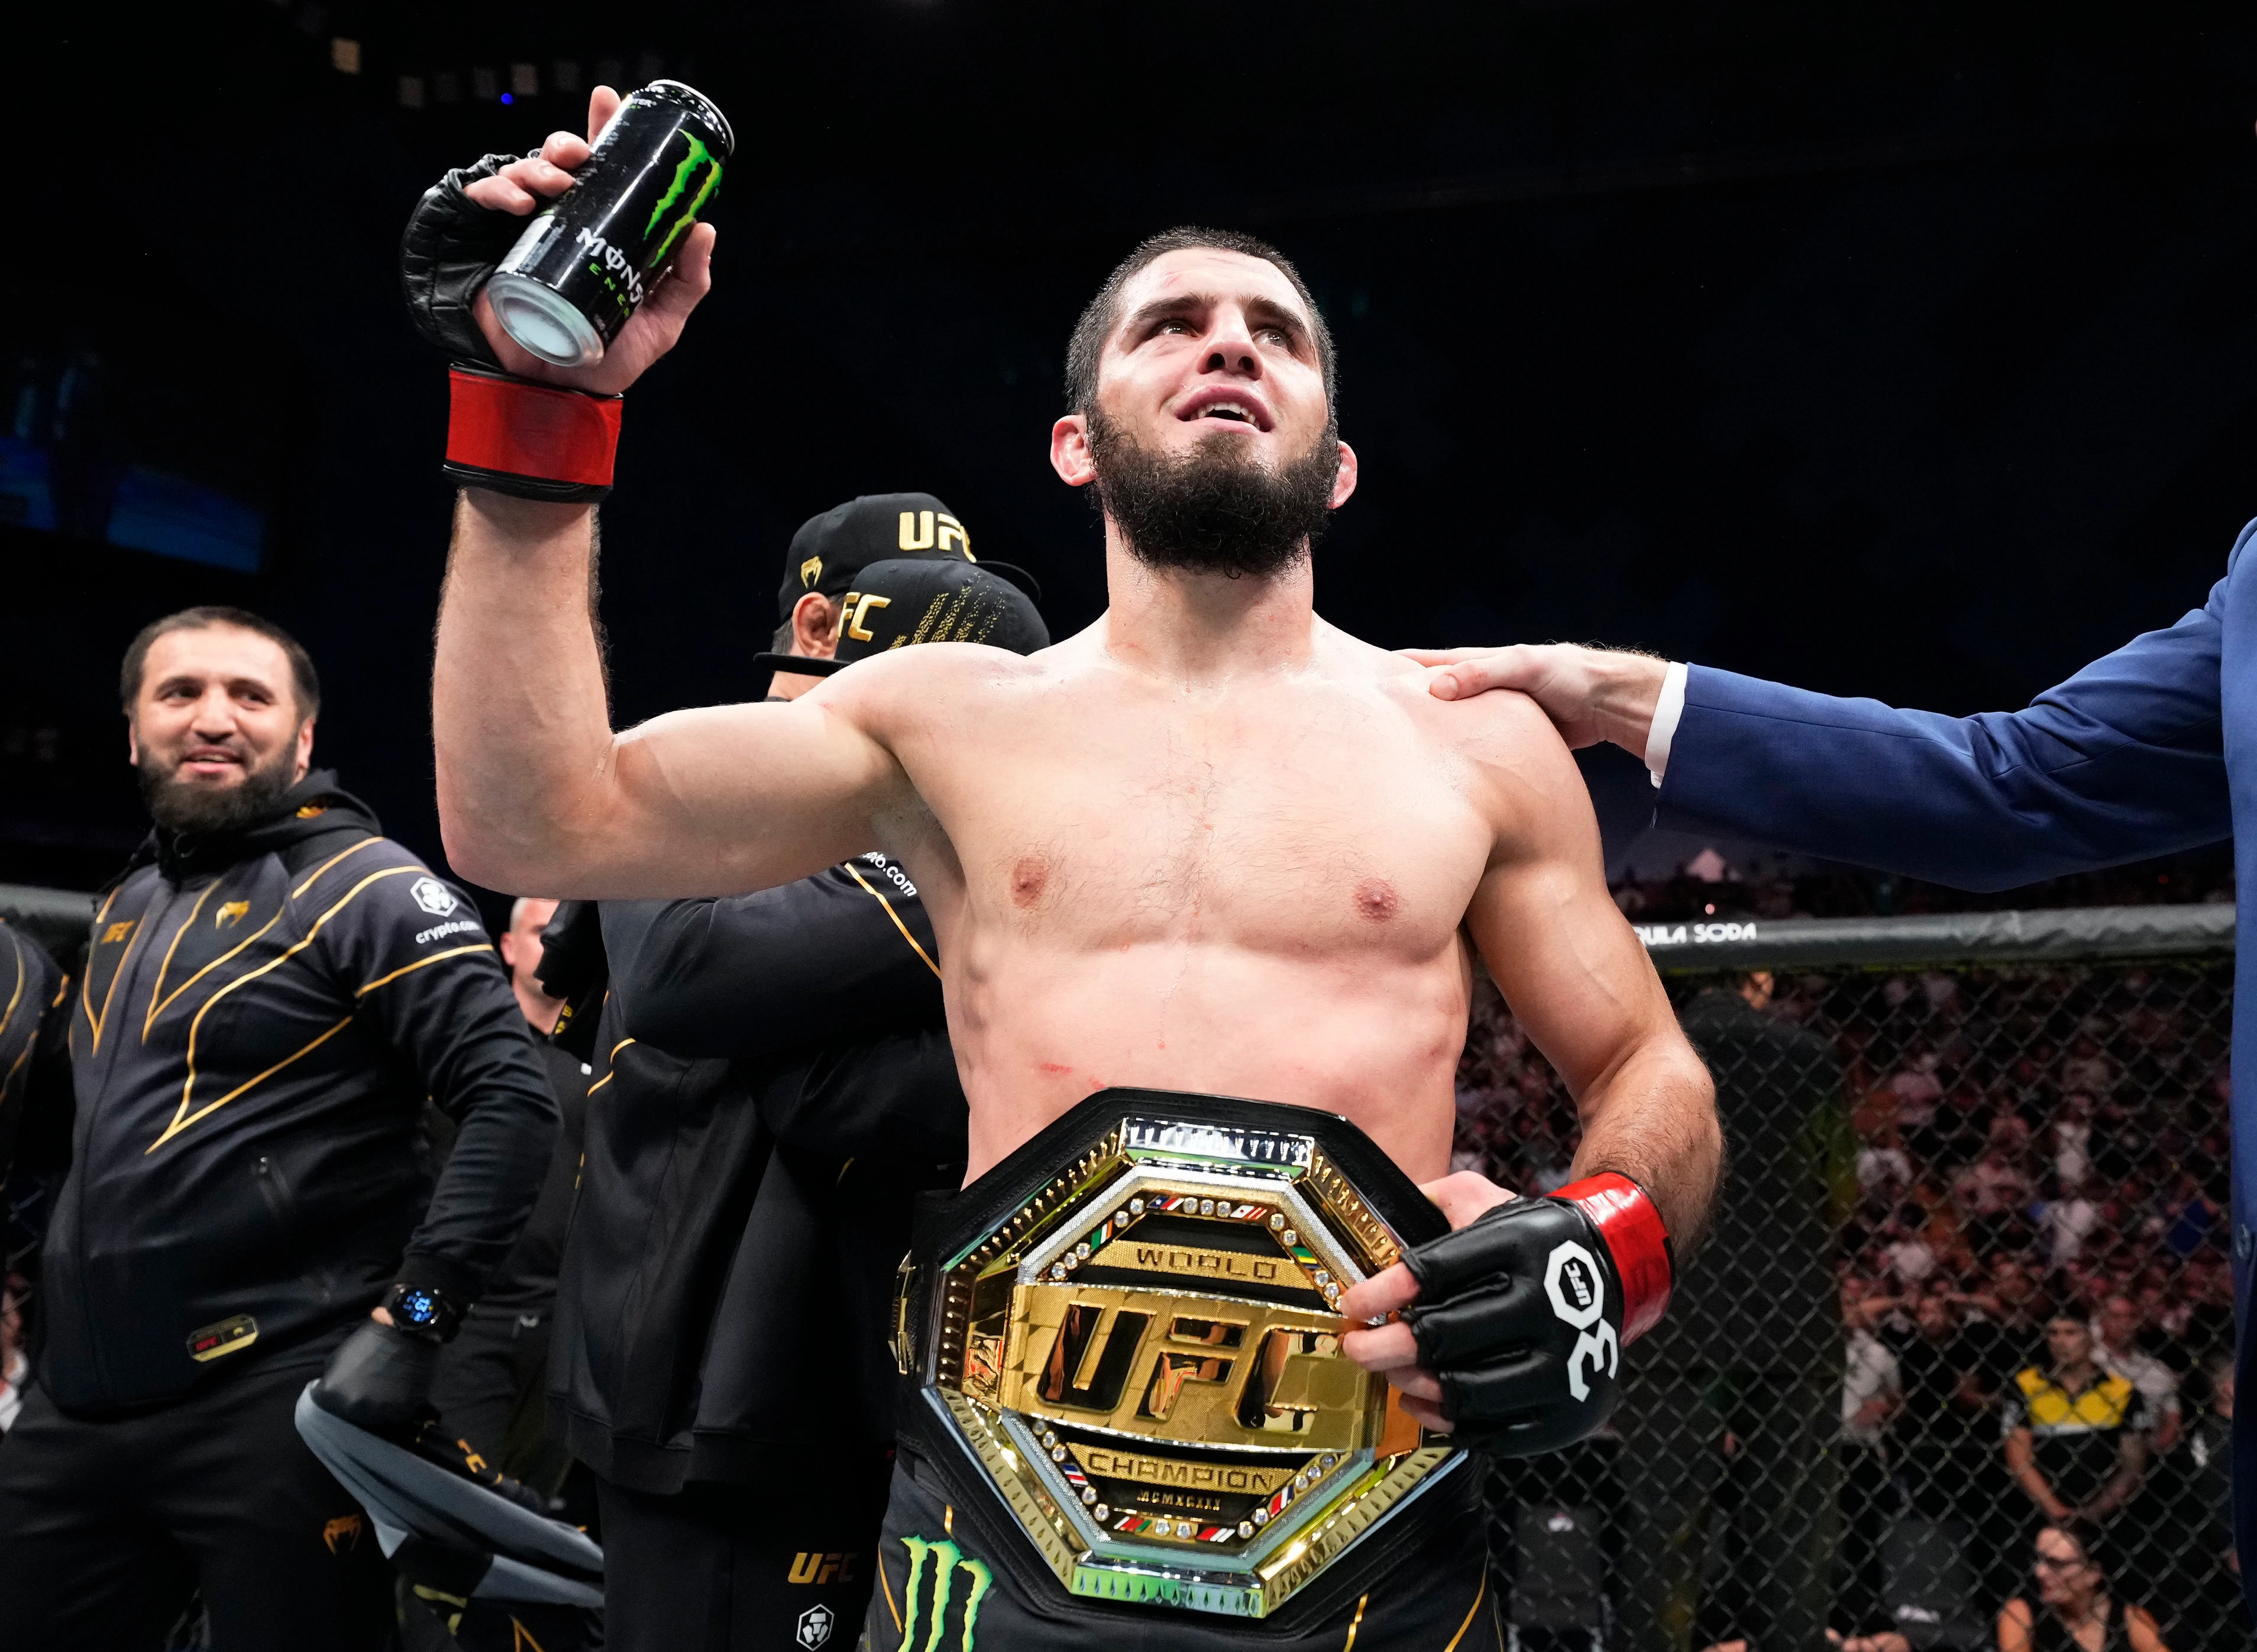 Makhachev Scheduled to Fight at UFC 294 on October 21 in Abu Dhabi